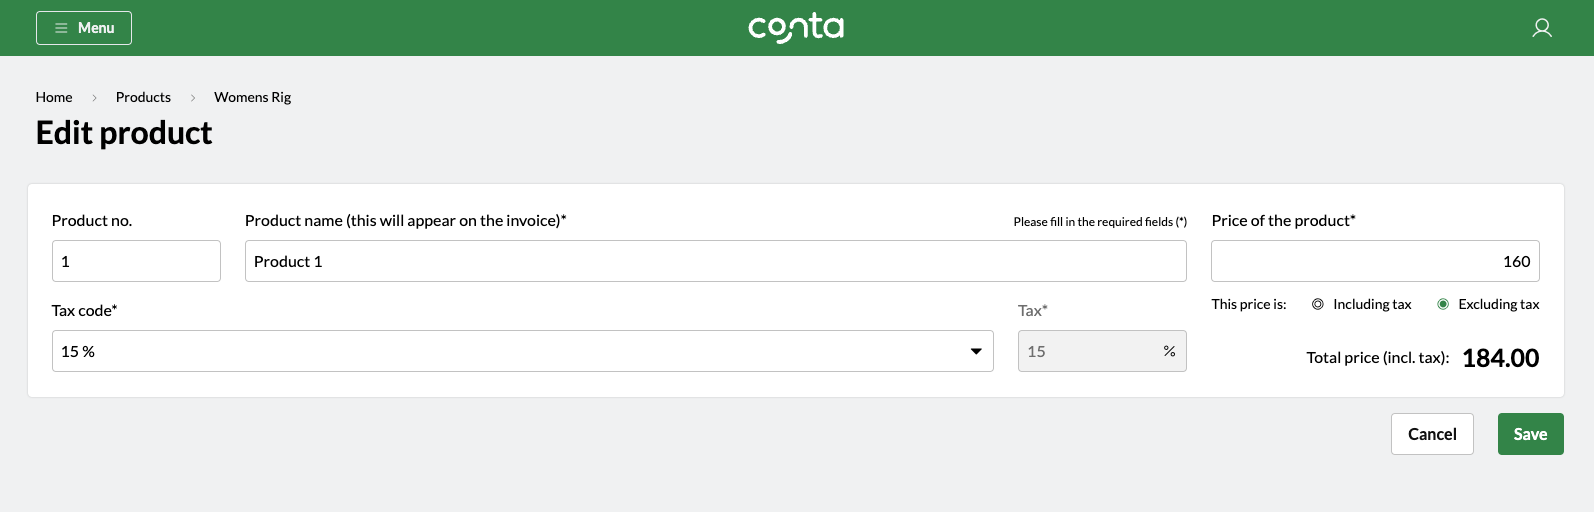 The edit product-page in Conta, where you can edit product details and save it to Conta